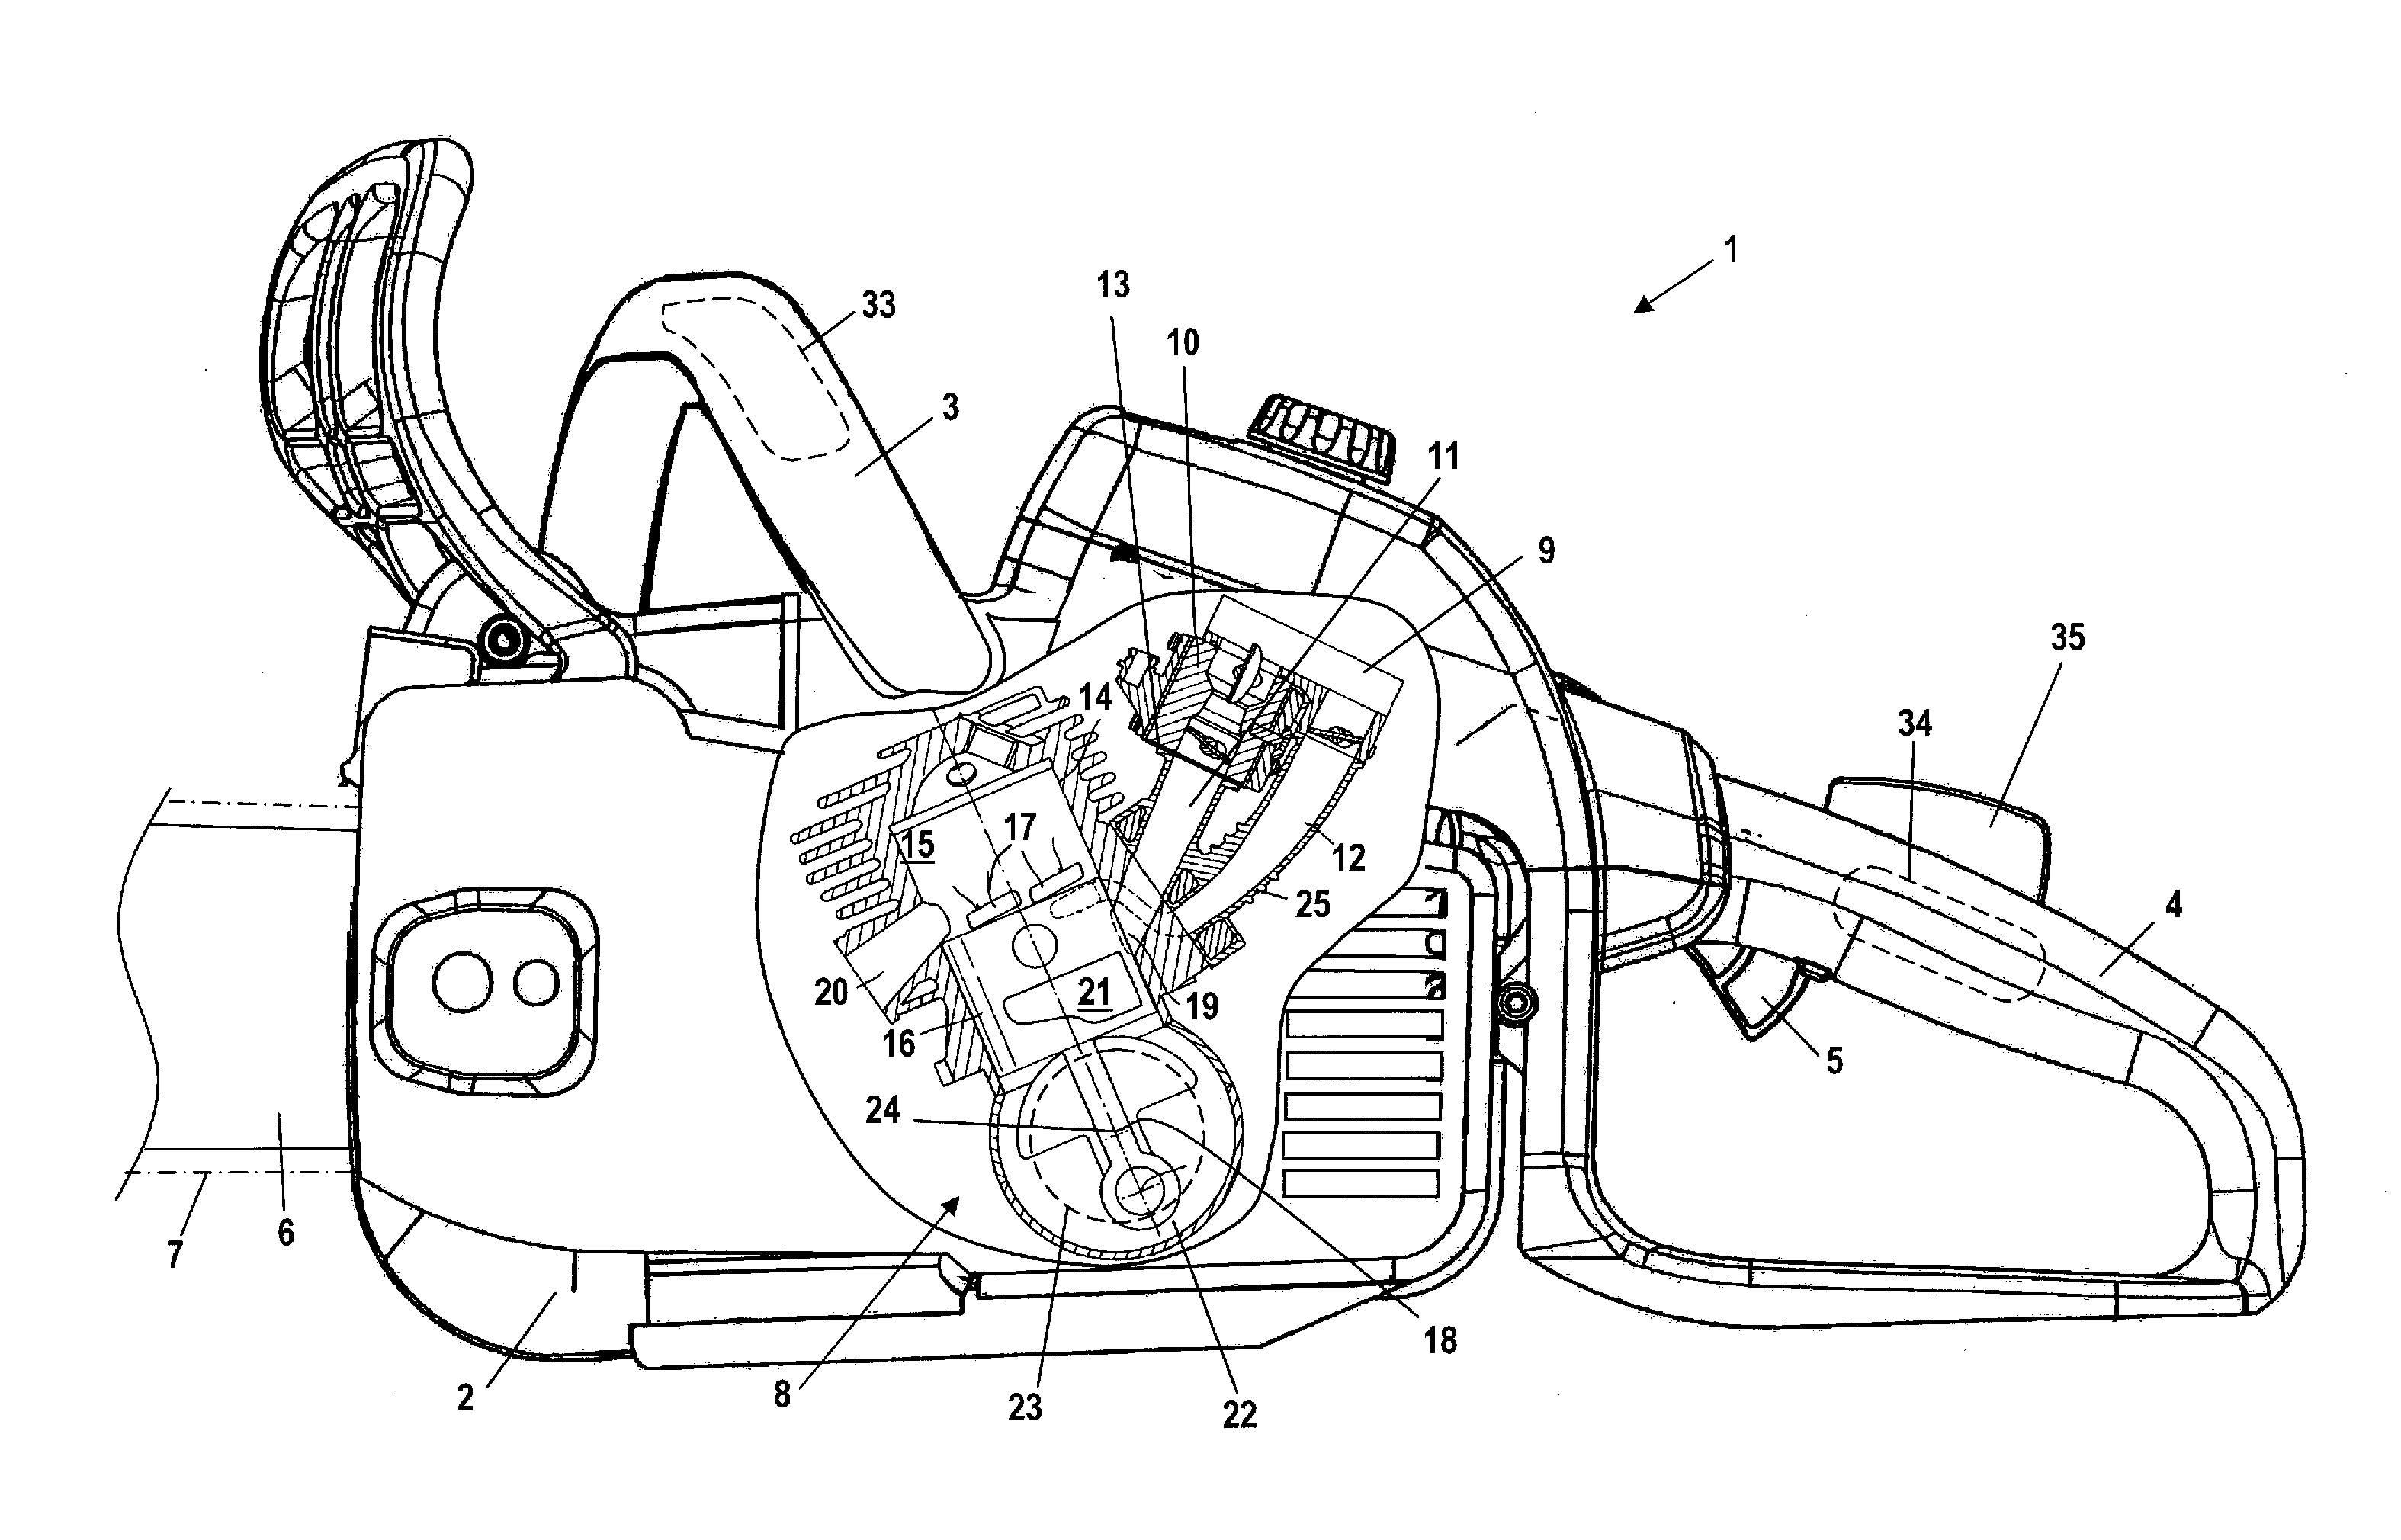 Handheld work apparatus having a control unit for an electric heating element